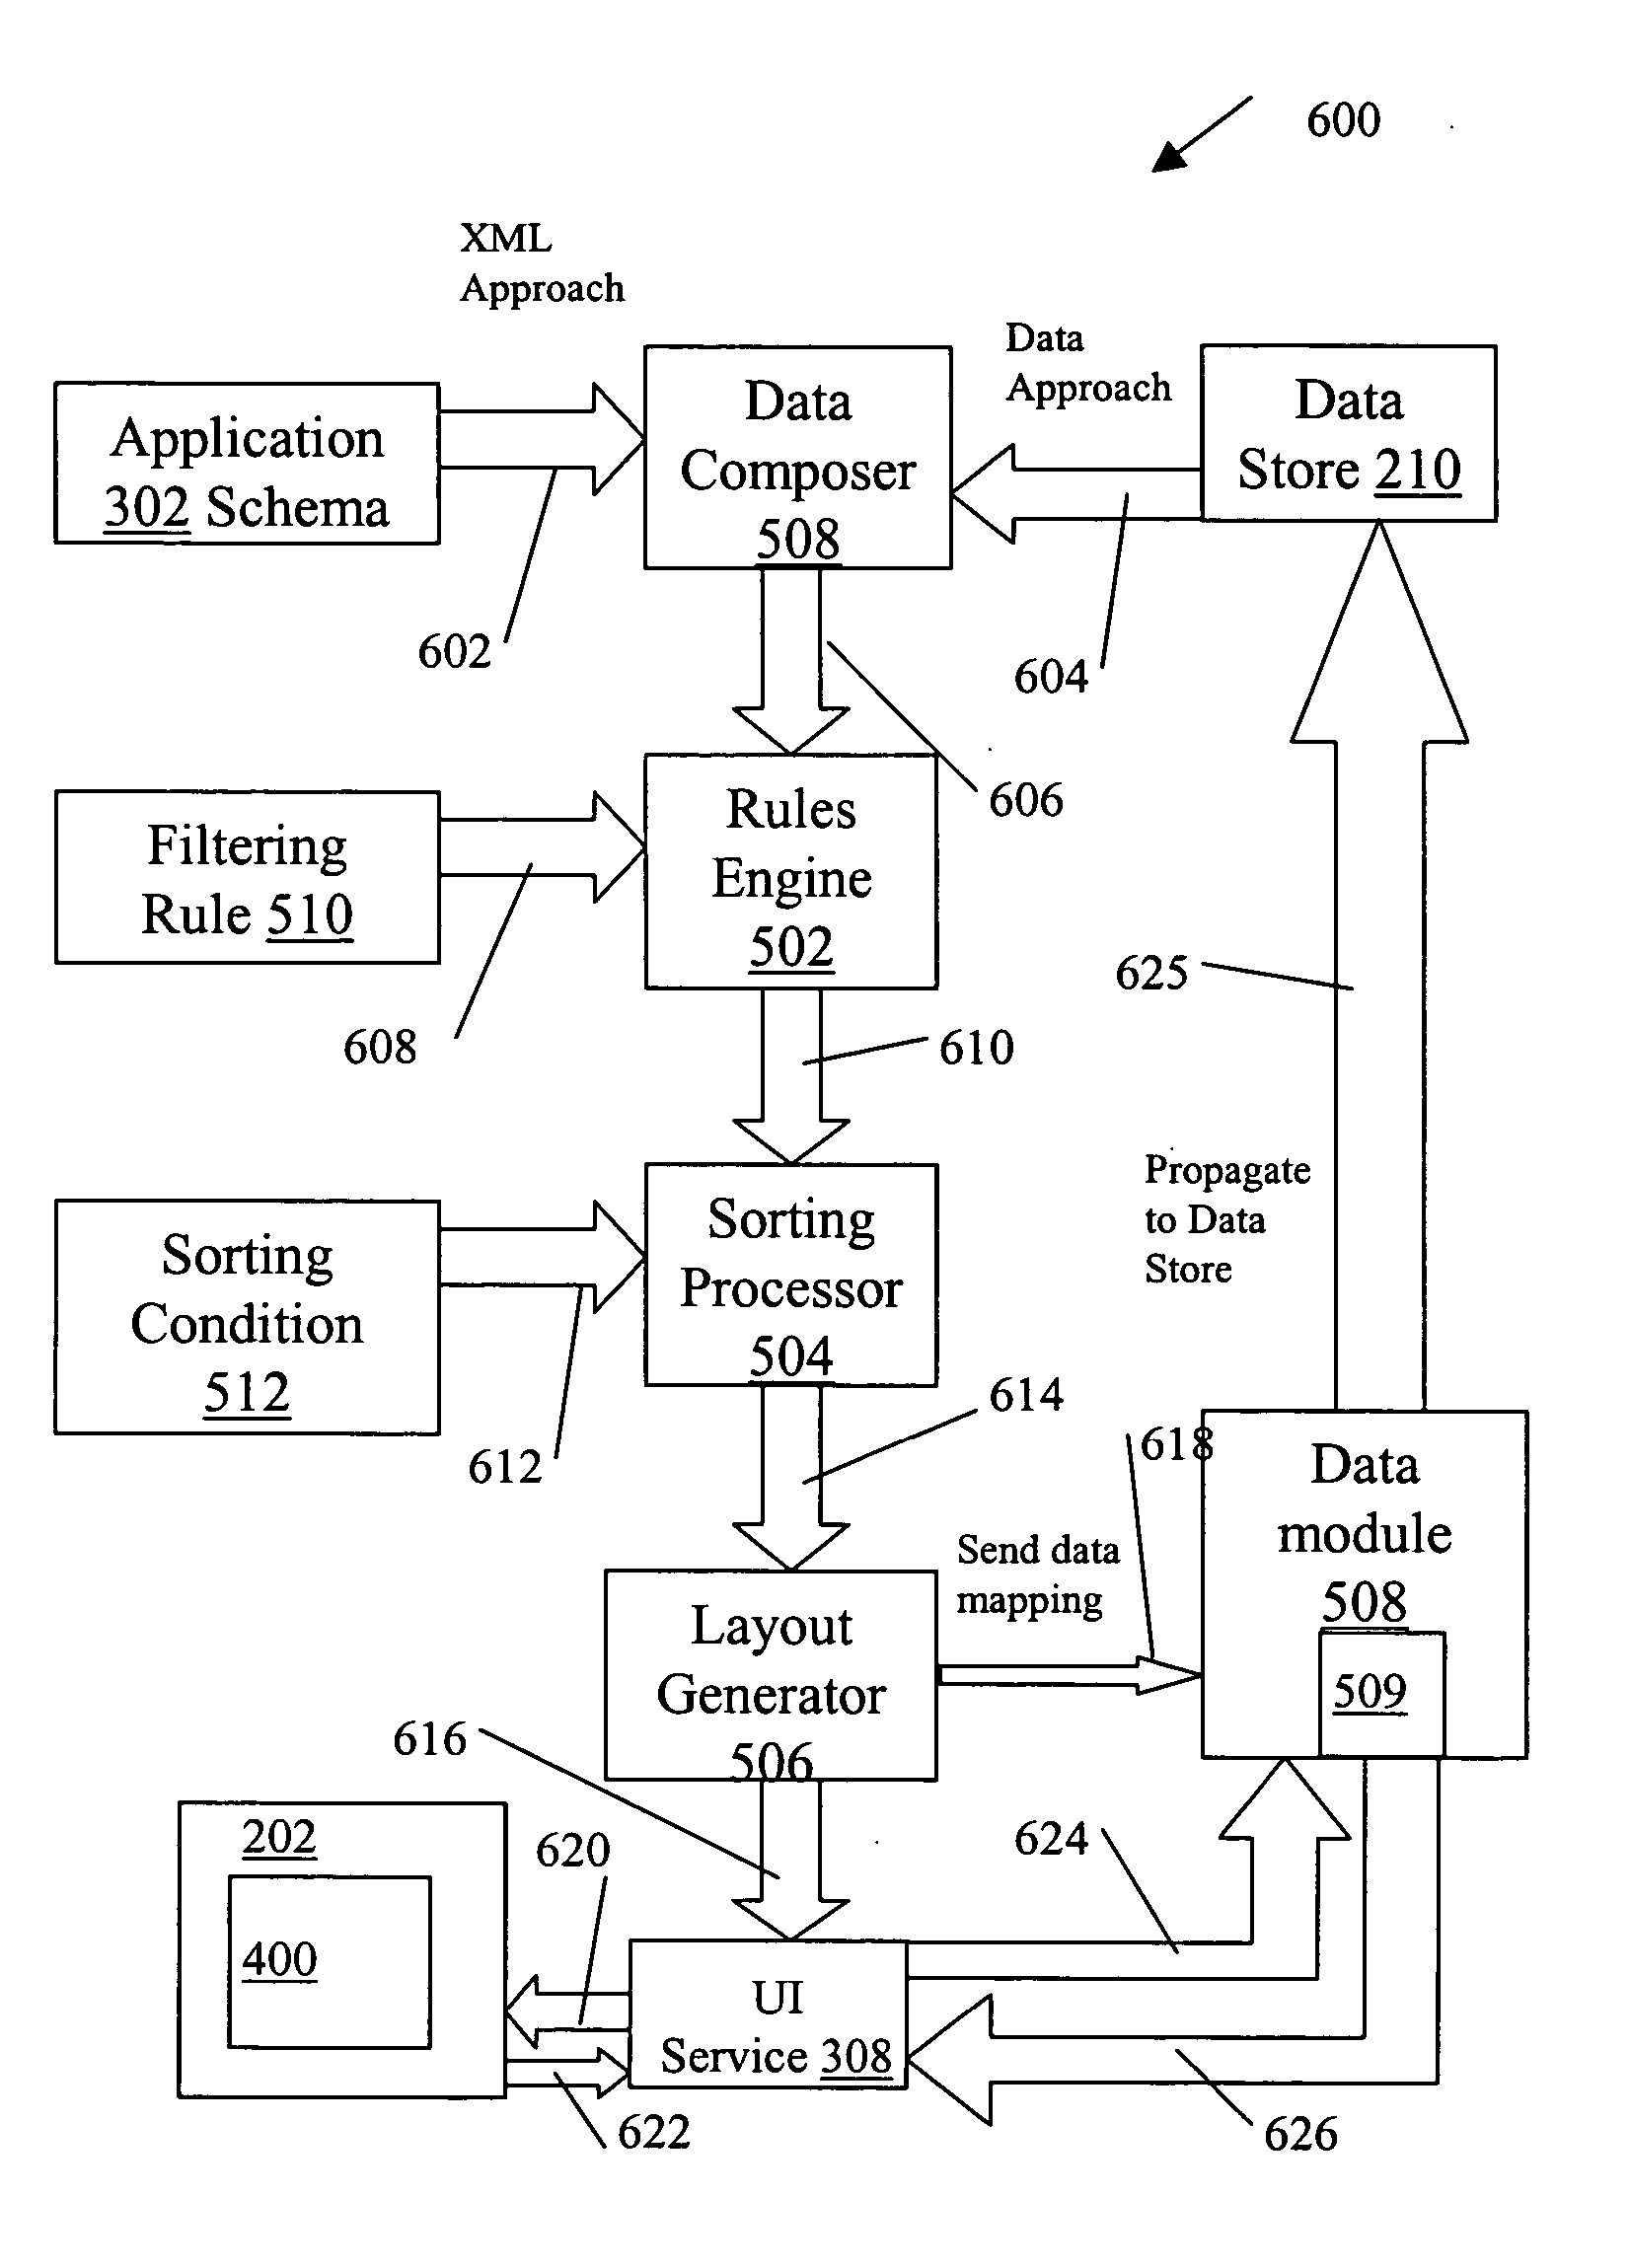 System and method for presentation of wireless application data using repetitive UI layouts